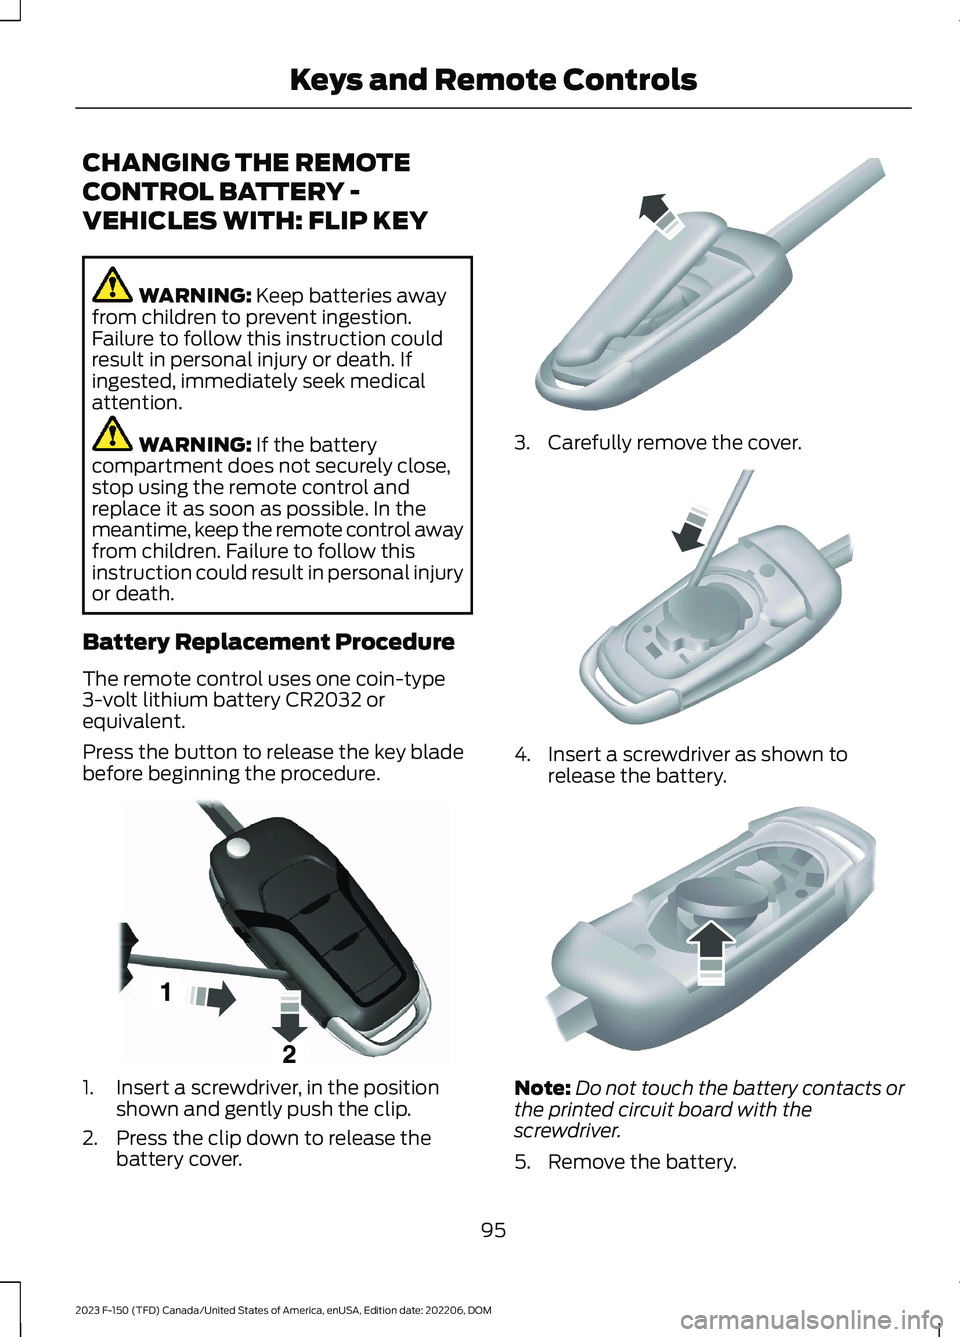 FORD F150 2023  Owners Manual CHANGING THE REMOTE
CONTROL BATTERY -
VEHICLES WITH: FLIP KEY
WARNING: Keep batteries awayfrom children to prevent ingestion.Failure to follow this instruction couldresult in personal injury or death.